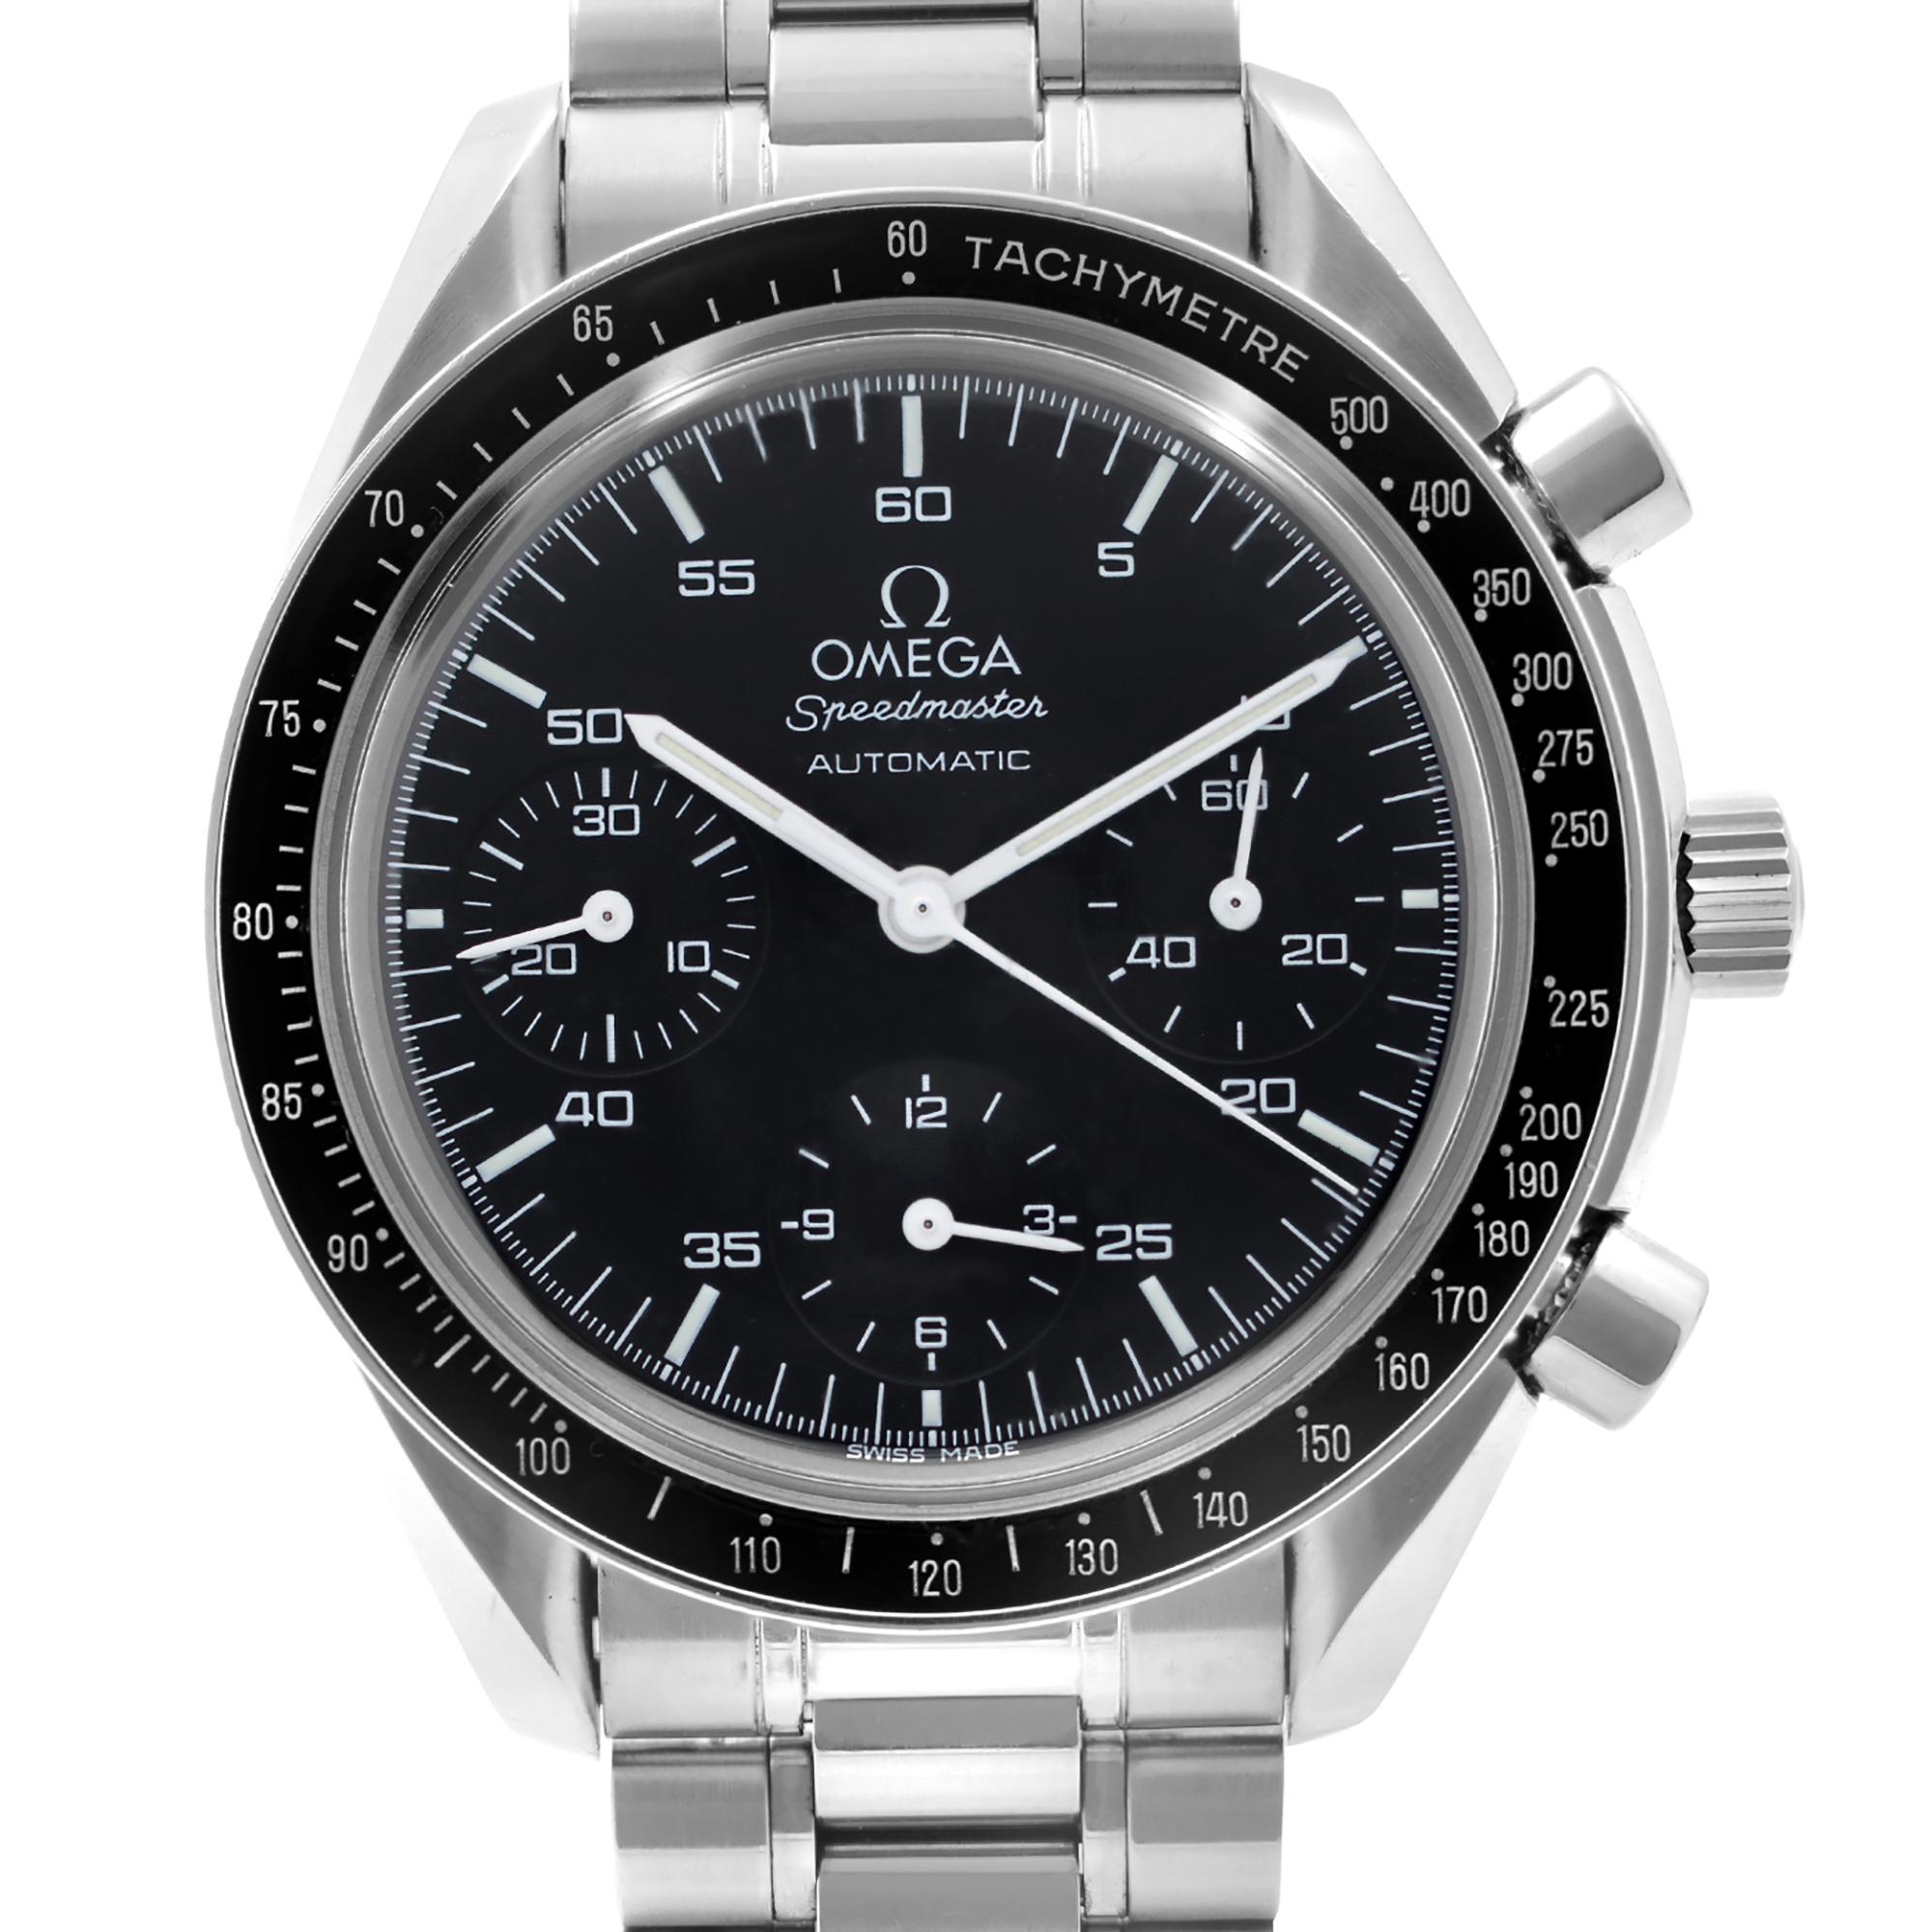 This Omega Speedmaster 39mm men's watch is pre-owned. The bezel has micro dents. Micro black mark on the 12-hour subdial. Omega Caliber 3220. No original box and papers are included. Comes with a gift box and the seller's warranty card. 

* Free